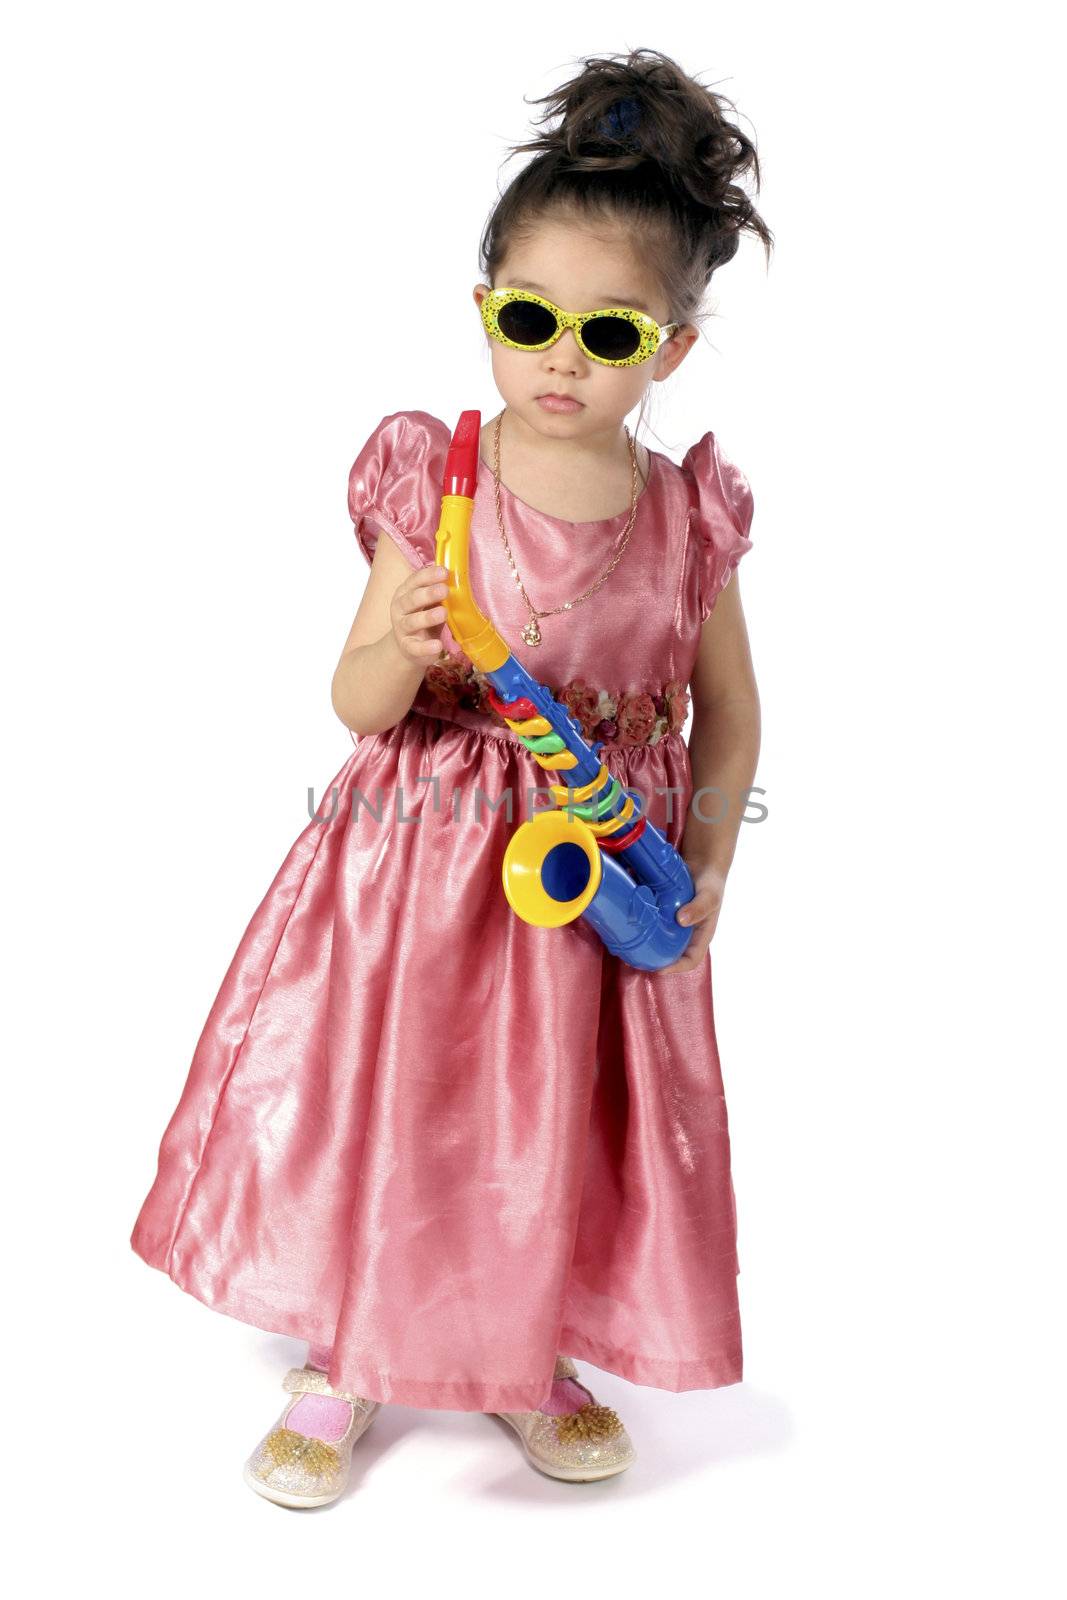 Small girl sun-protective spectacles with saxophone in hand